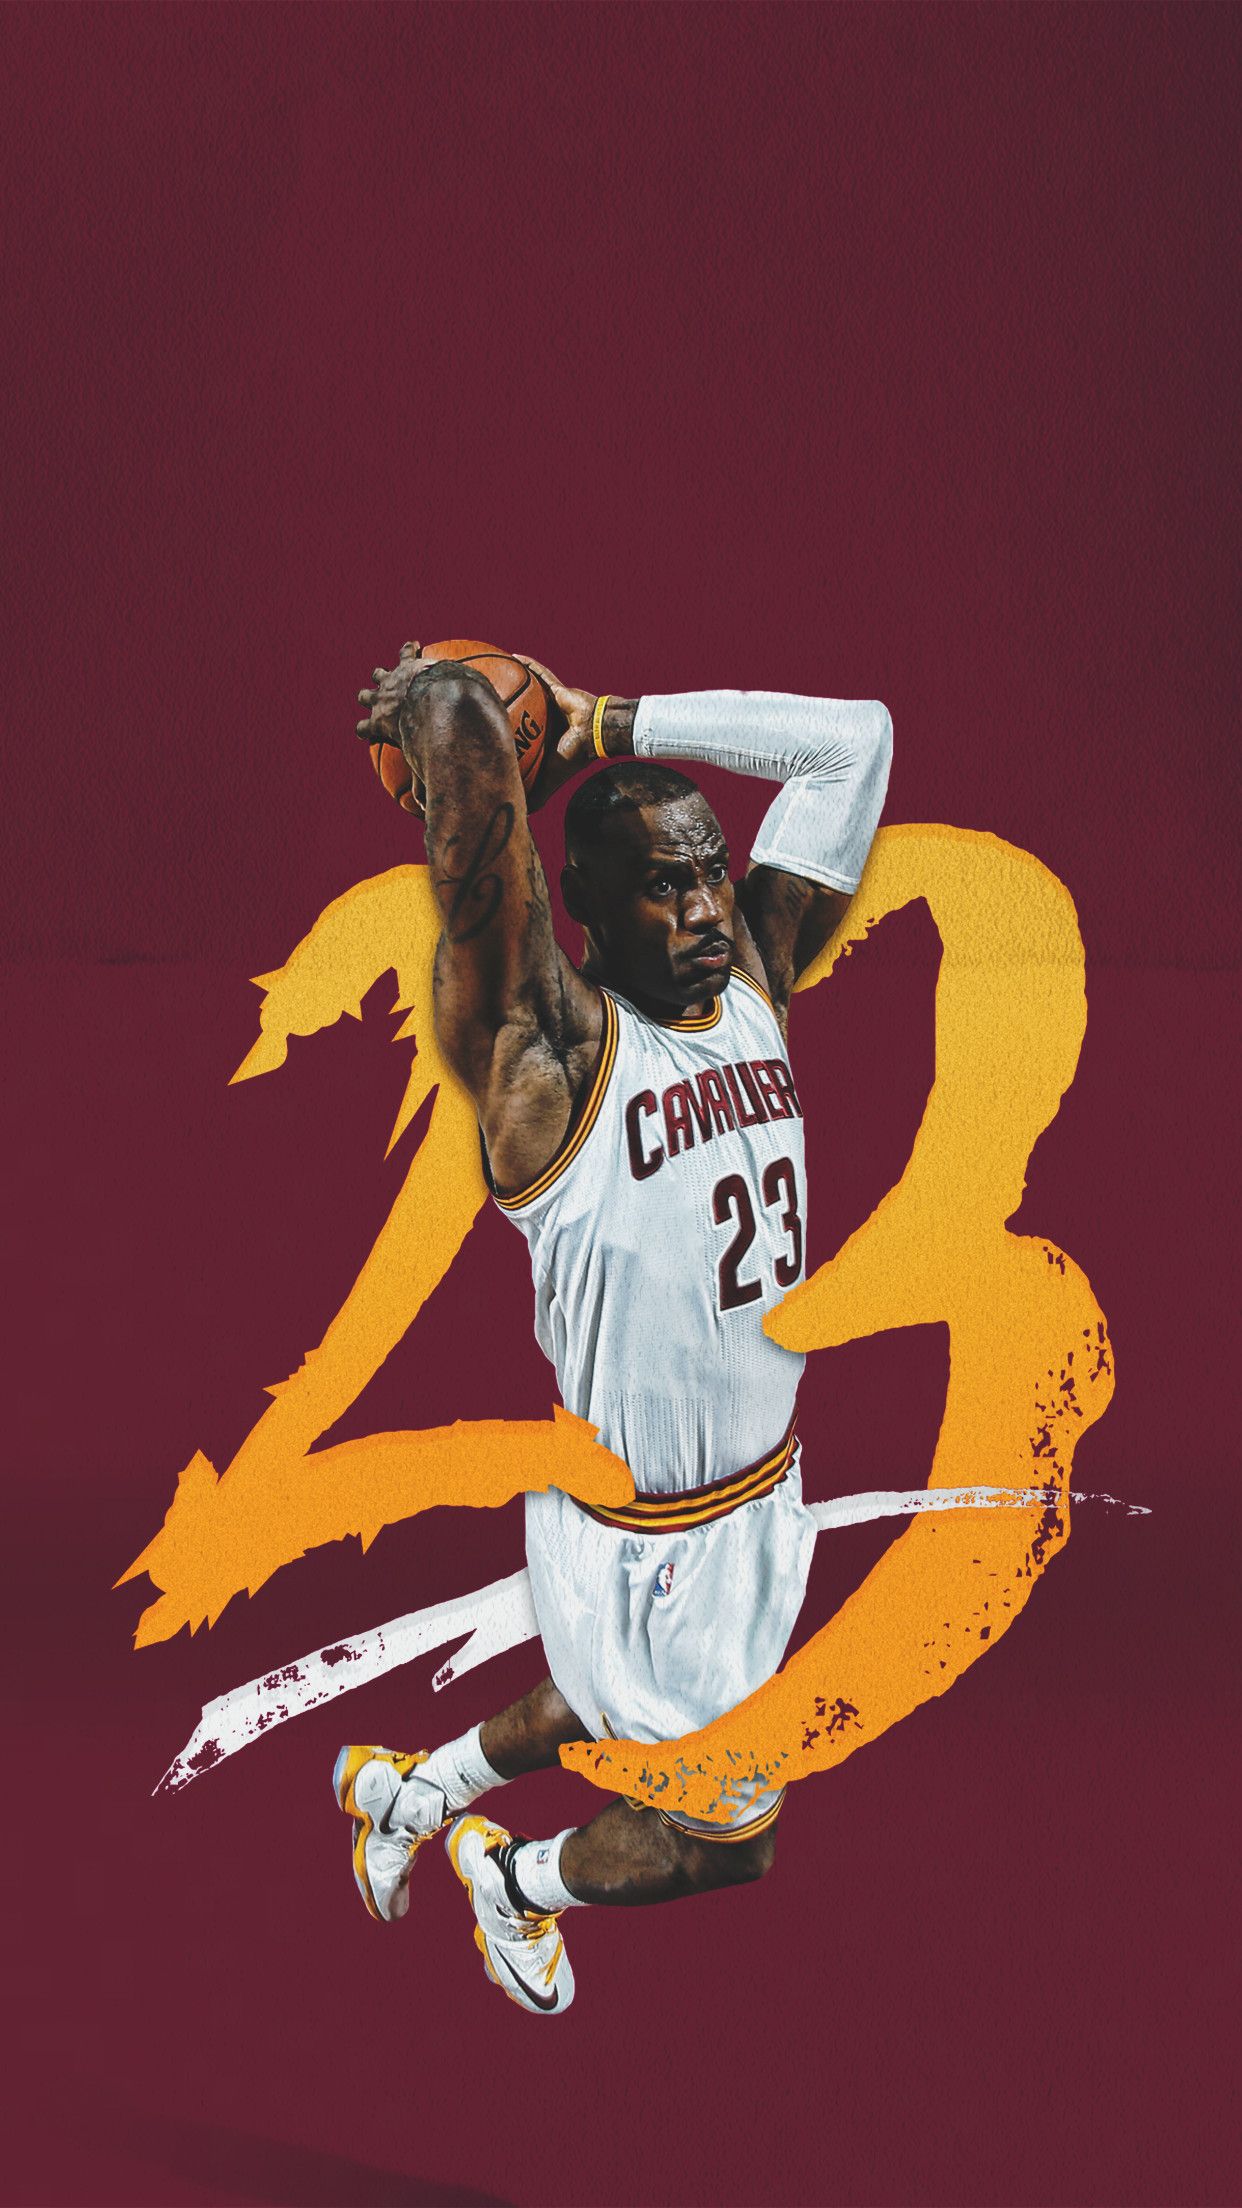 2017 NBA Champions wallpaper I made for my phone. Let me know if you'd like me to make one for your phone! - NBA